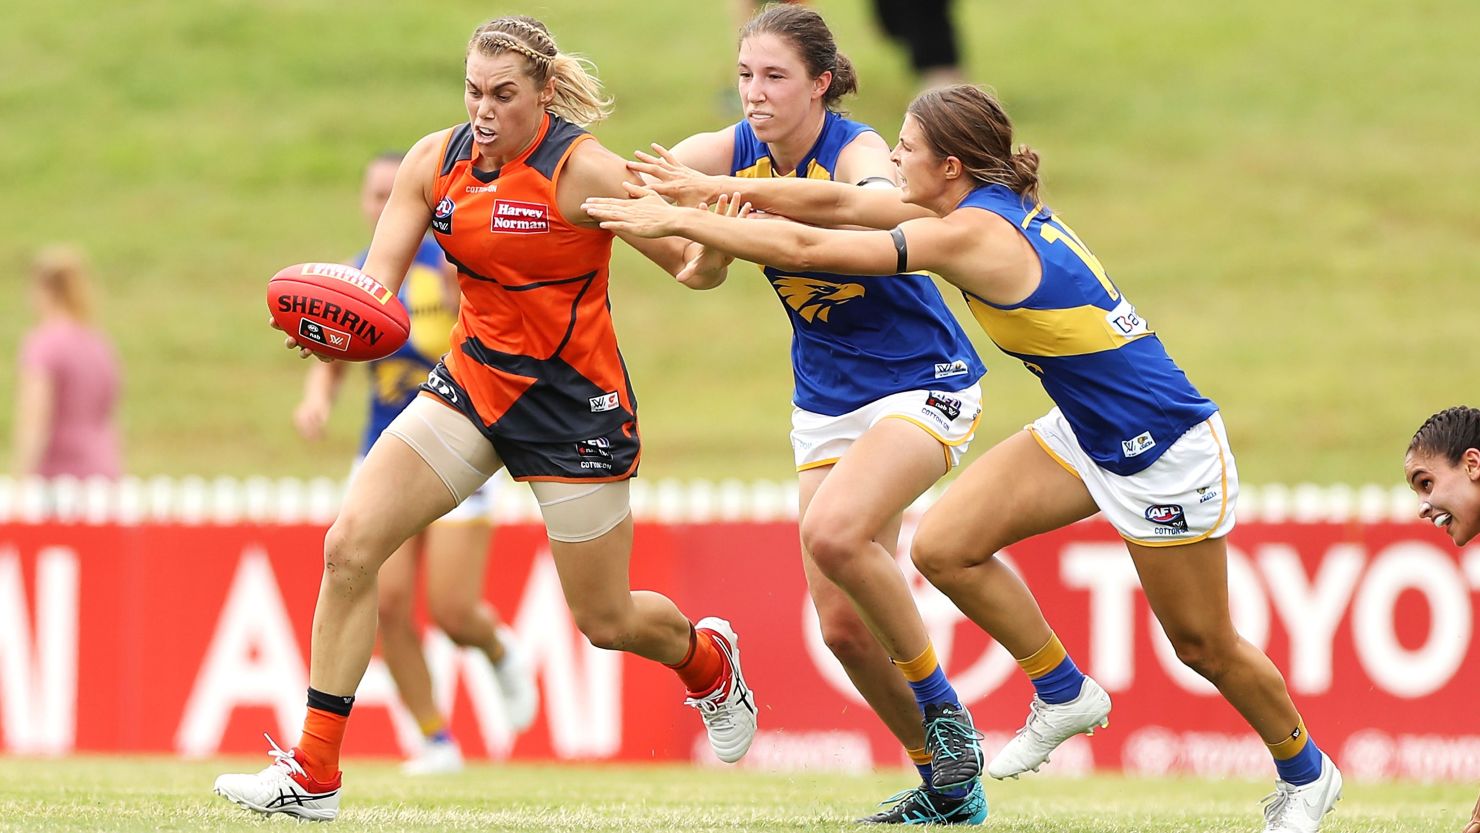 Jacinda Barclay (left), who played Australian rules for the GWS Giants, has died aged 29.